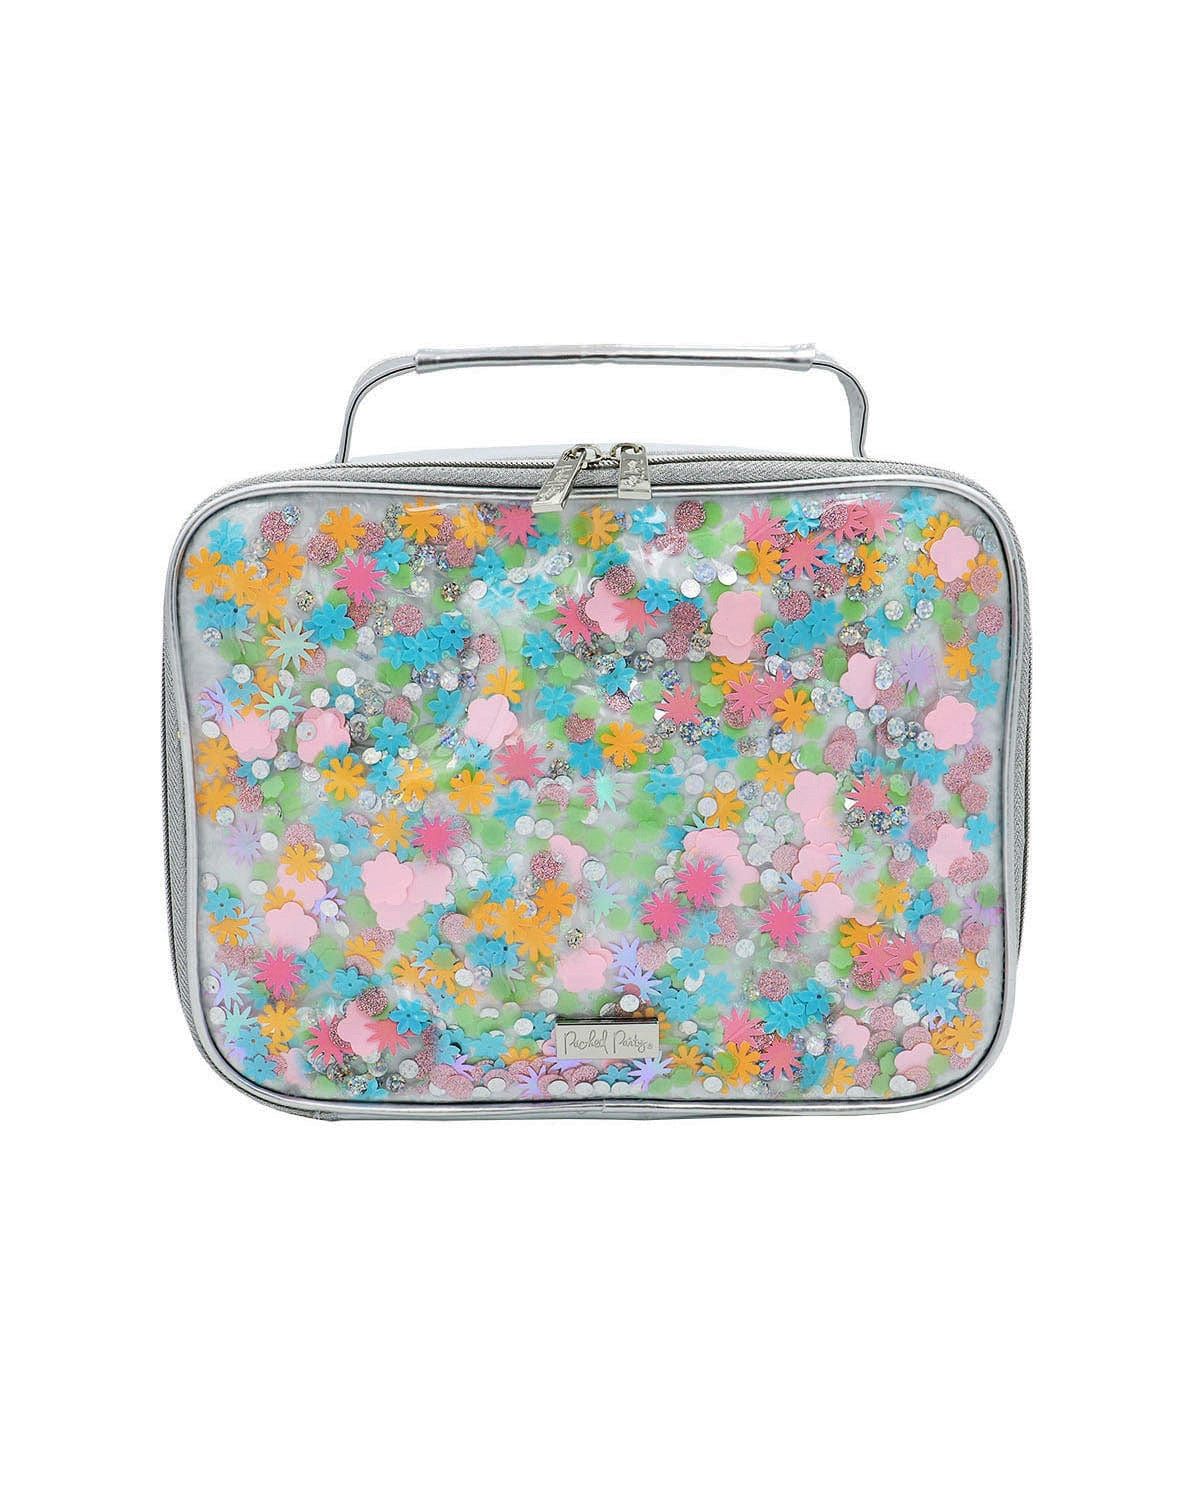 Flower Shop Confetti Insulated Lunchbox | Packed Party